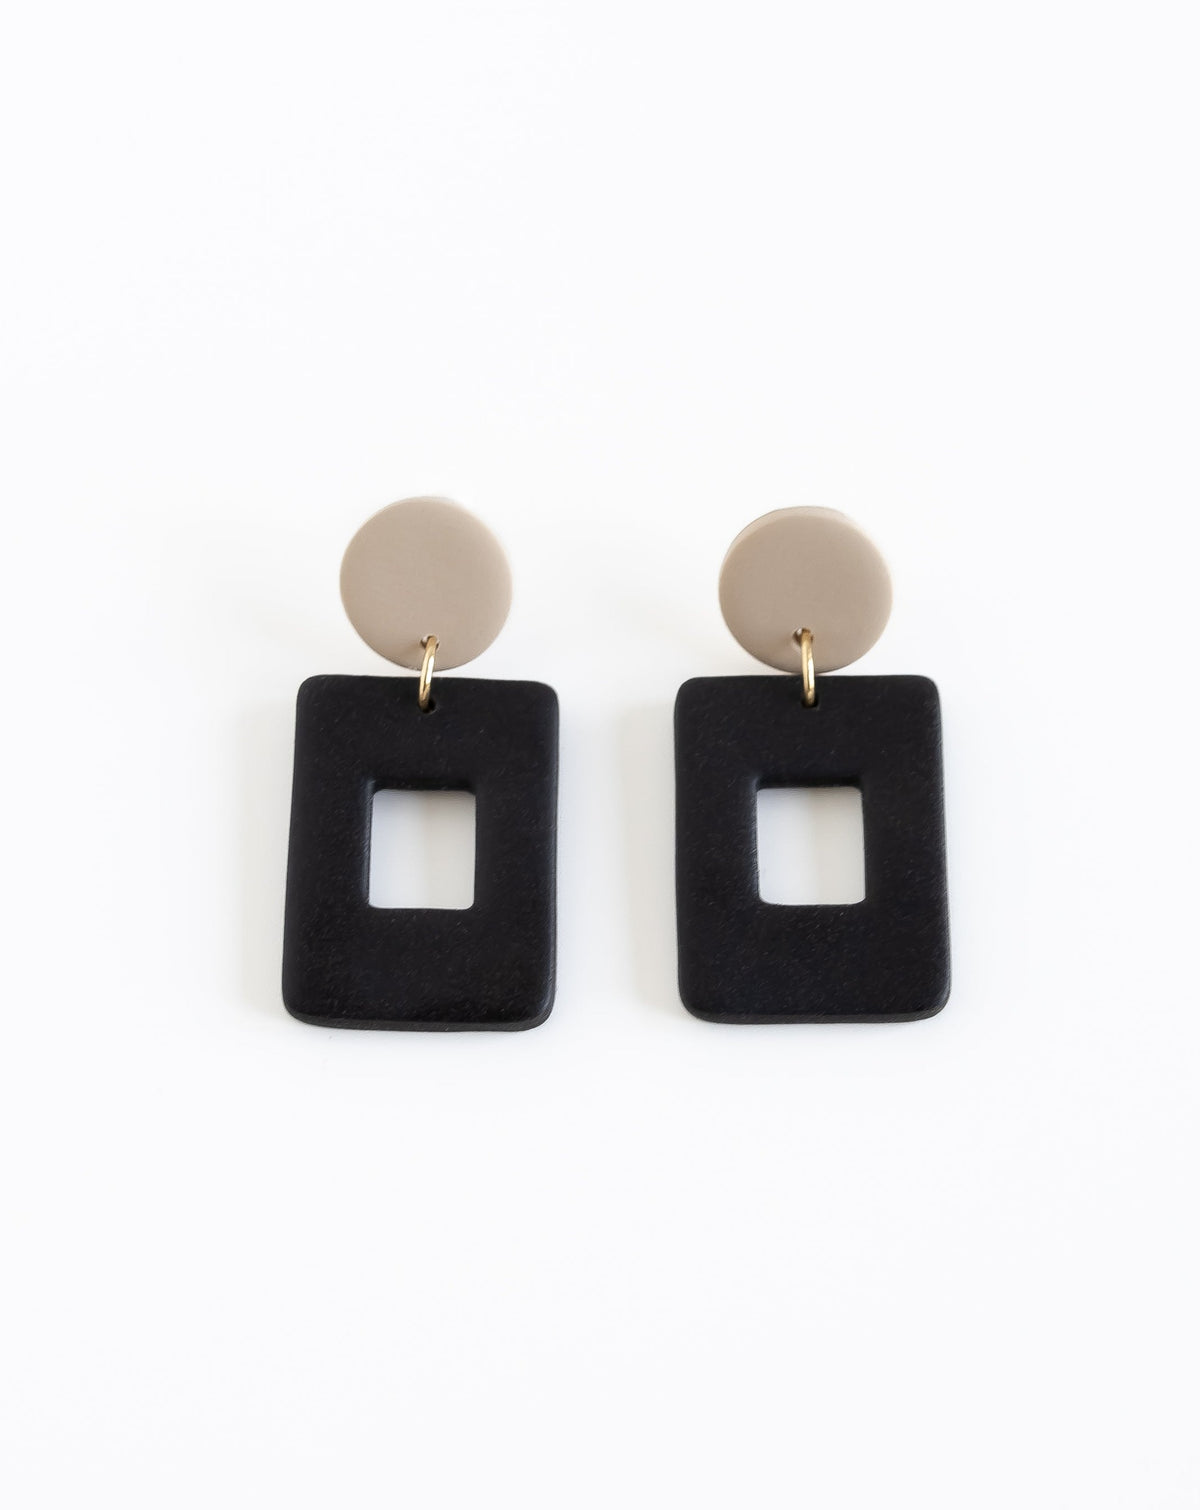 Muna earrings in Black color, front view